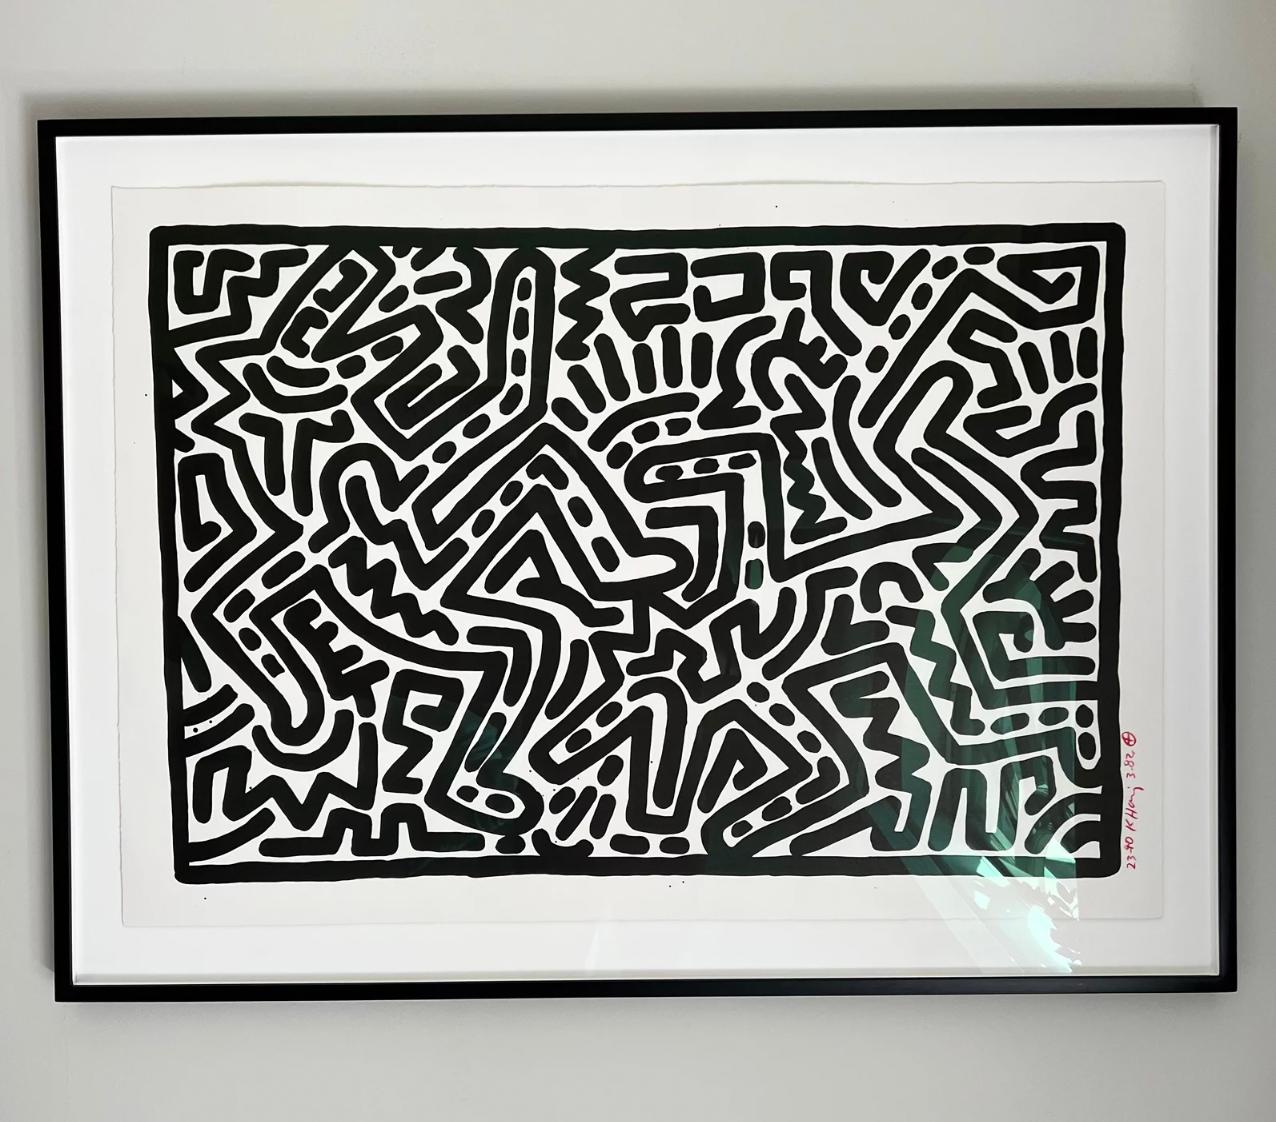 Artist: Keith Haring 
Title: Untitled (Plate 1)
Size:  24 x 36 in. (61 x 91.4 cm)
Medium: Lithograph of Arches Paper
Edition: 23 of 40
Year: 1982
Notes: From a suite of six prints. Signed, dated and numbered on right edge. Published by Barbara